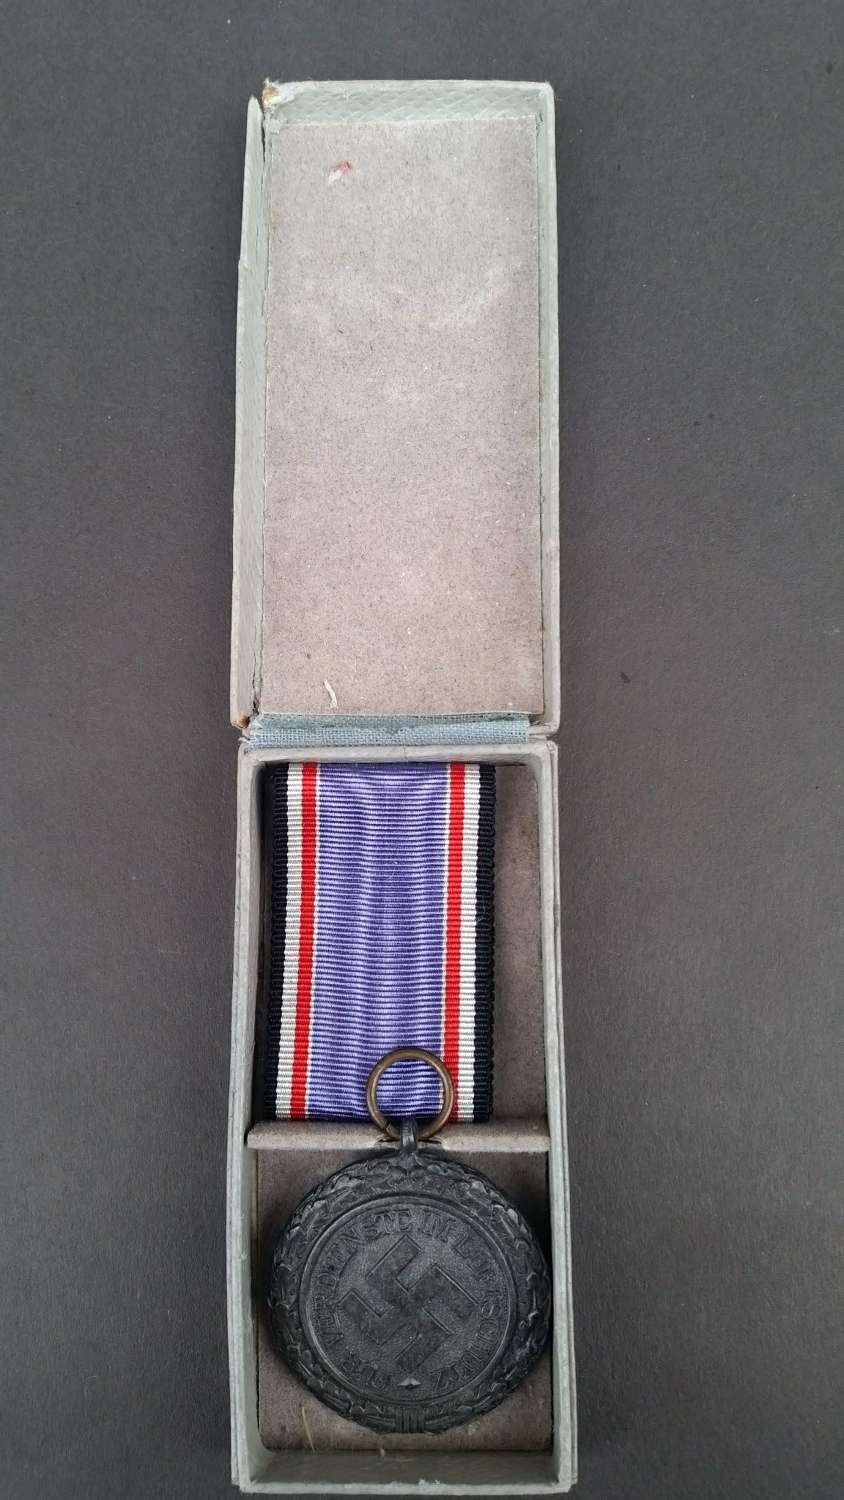 Boxed Luftschutz Medal 1938